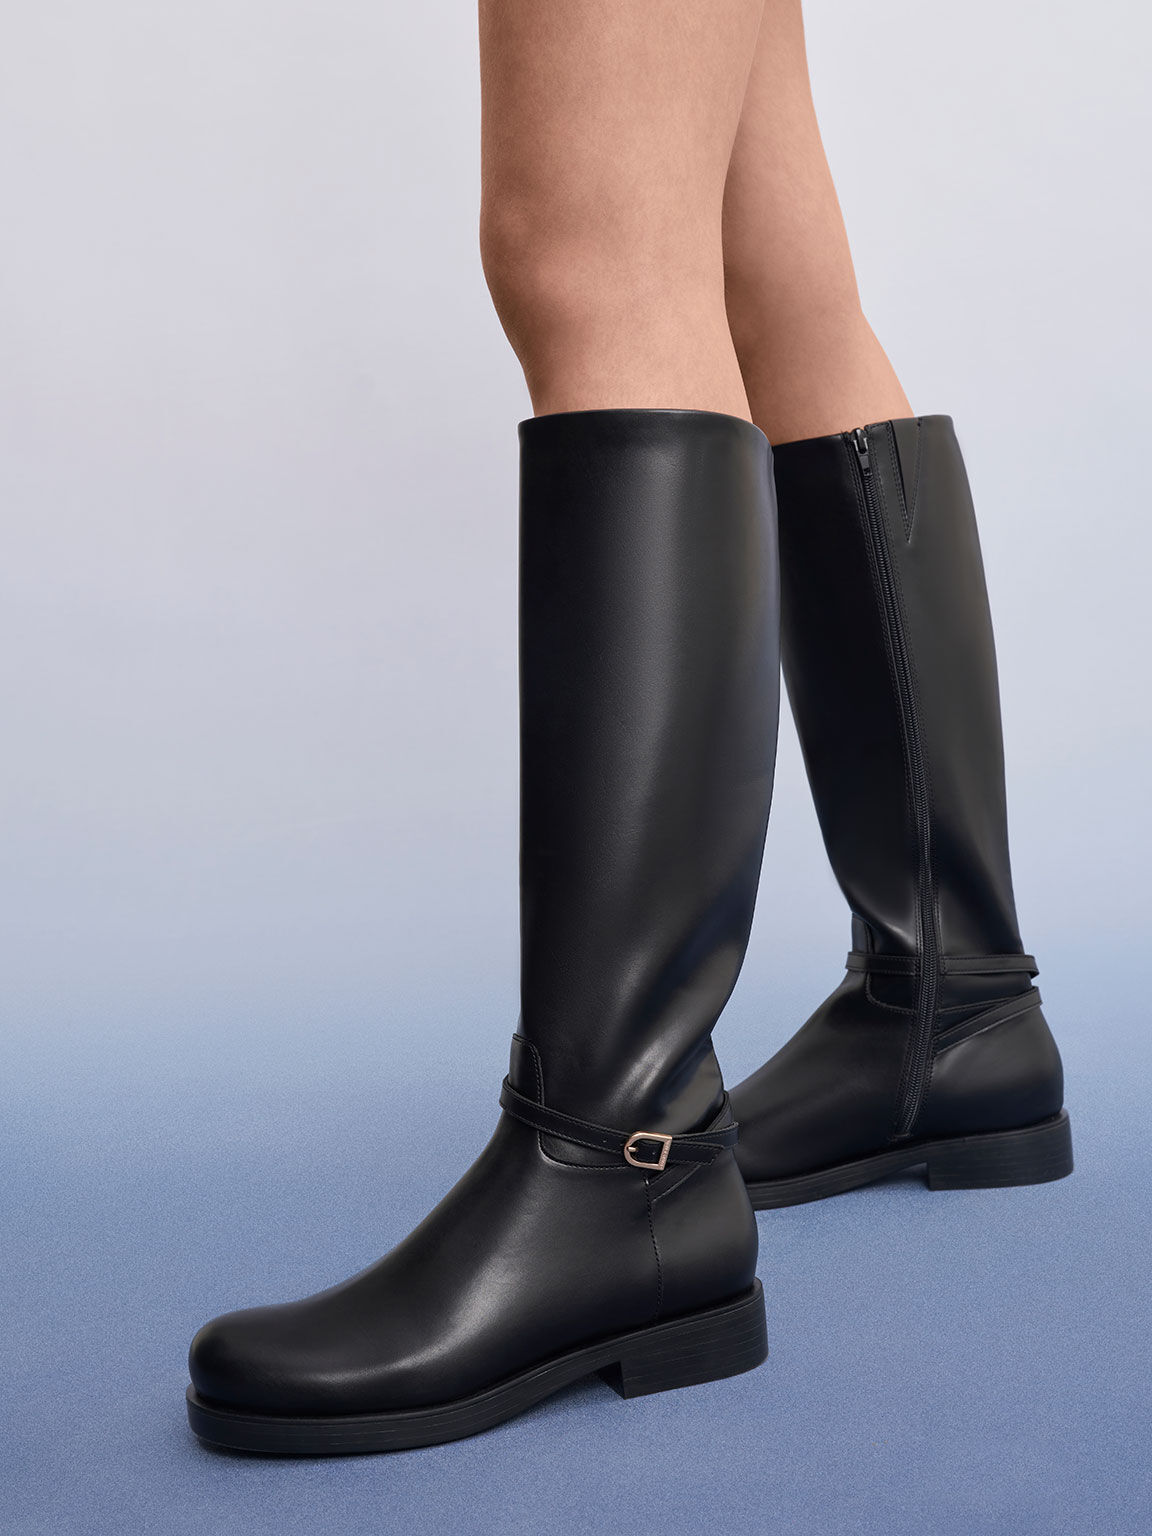 Black Belted Knee-High Boots - CHARLES & KEITH US